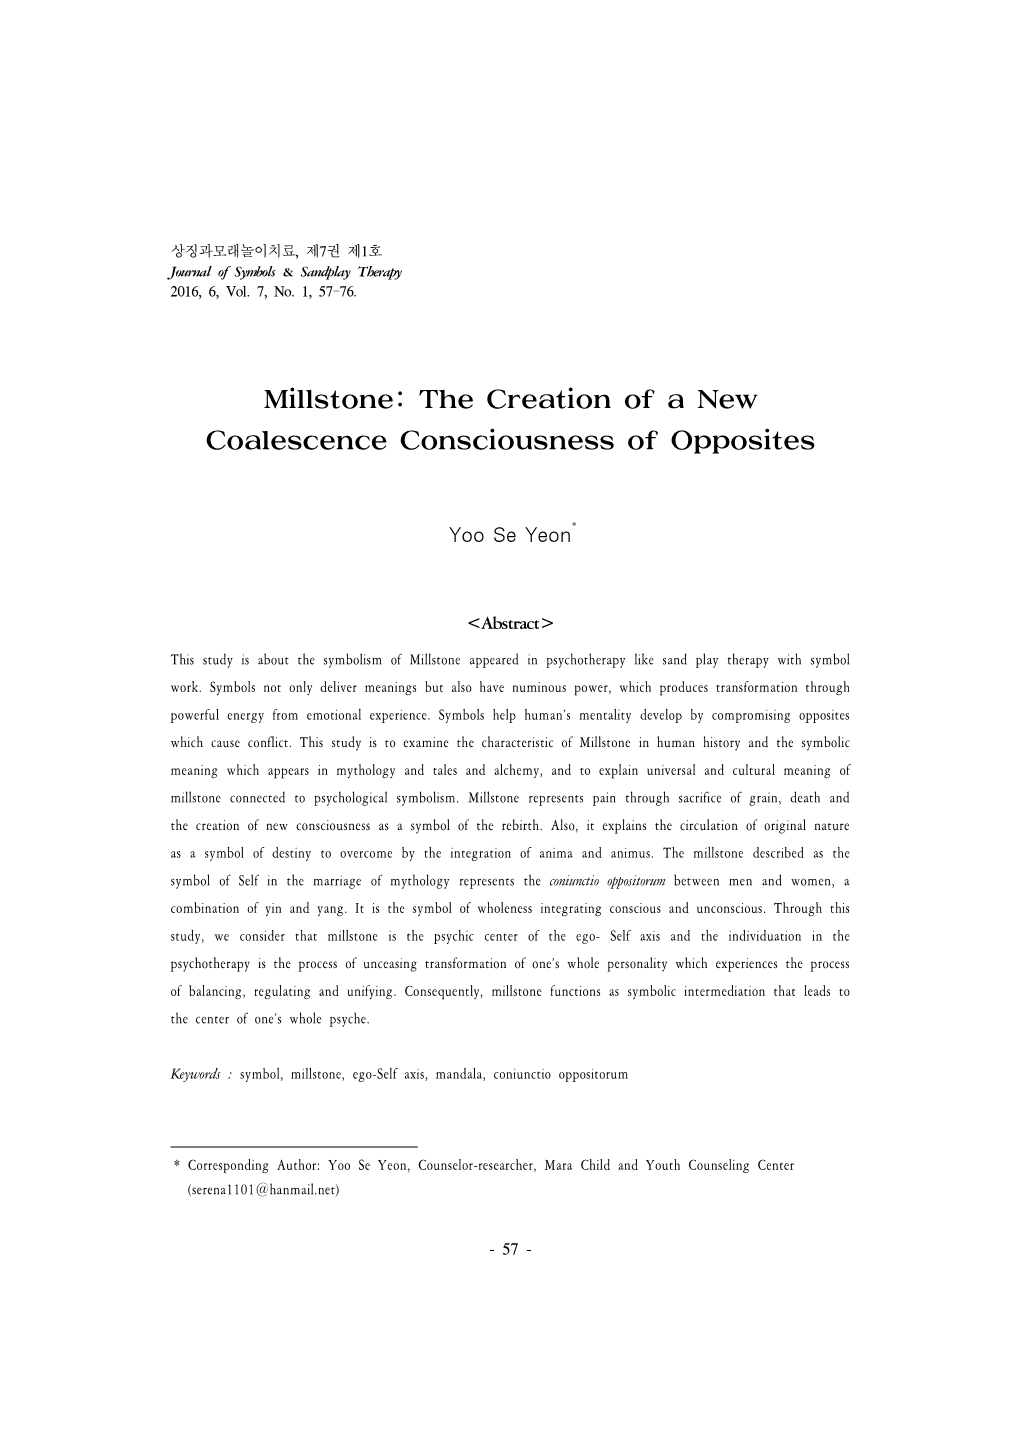 Millstone: the Creation of a New Coalescence Consciousness of Opposites